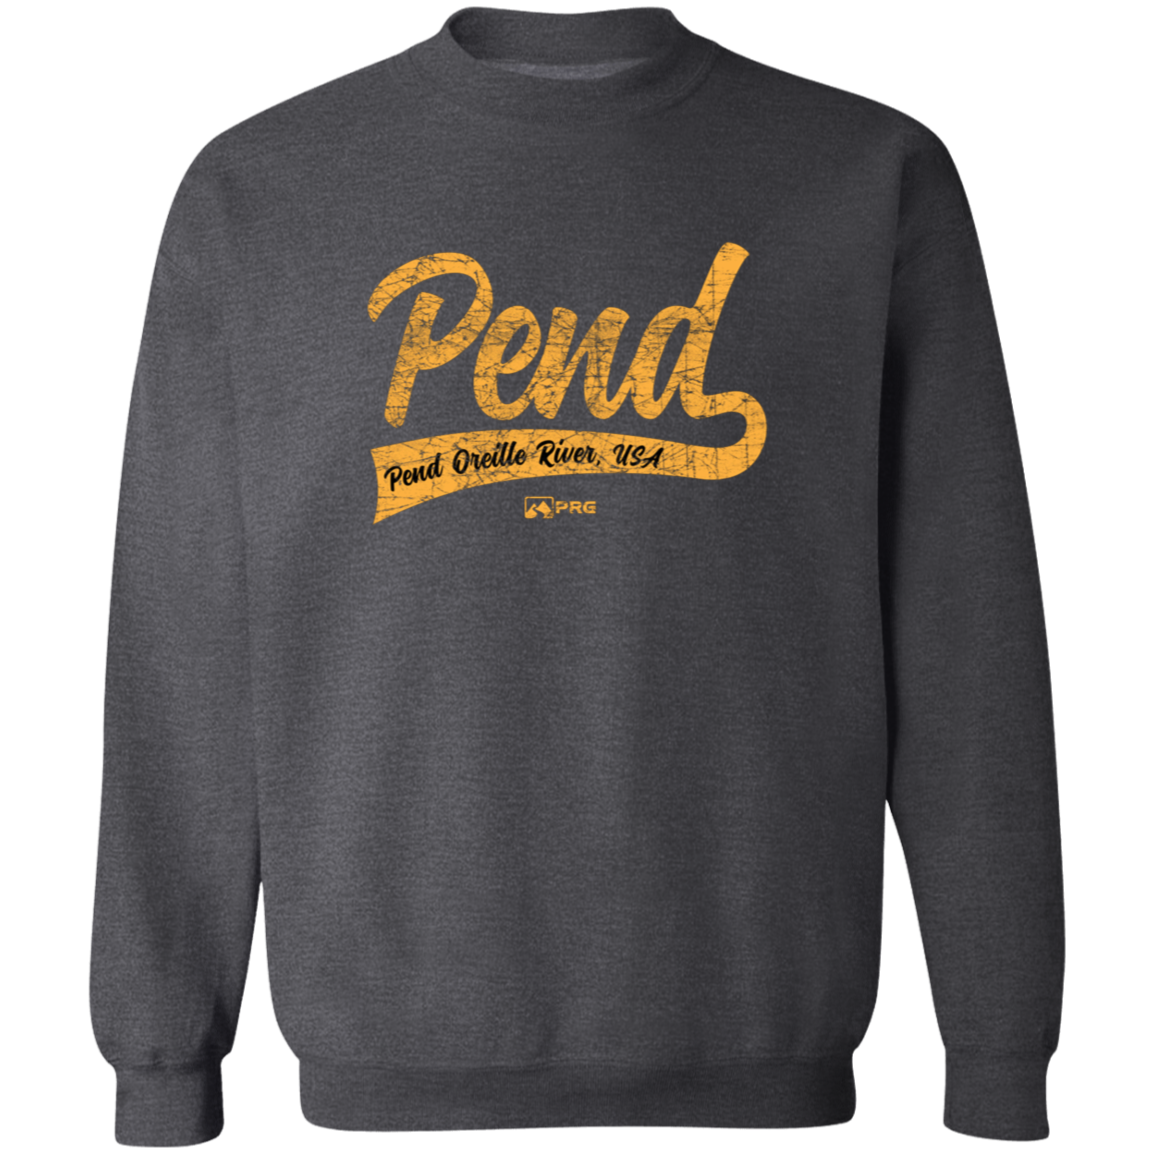 Pend for the Pennant - Sweatshirt